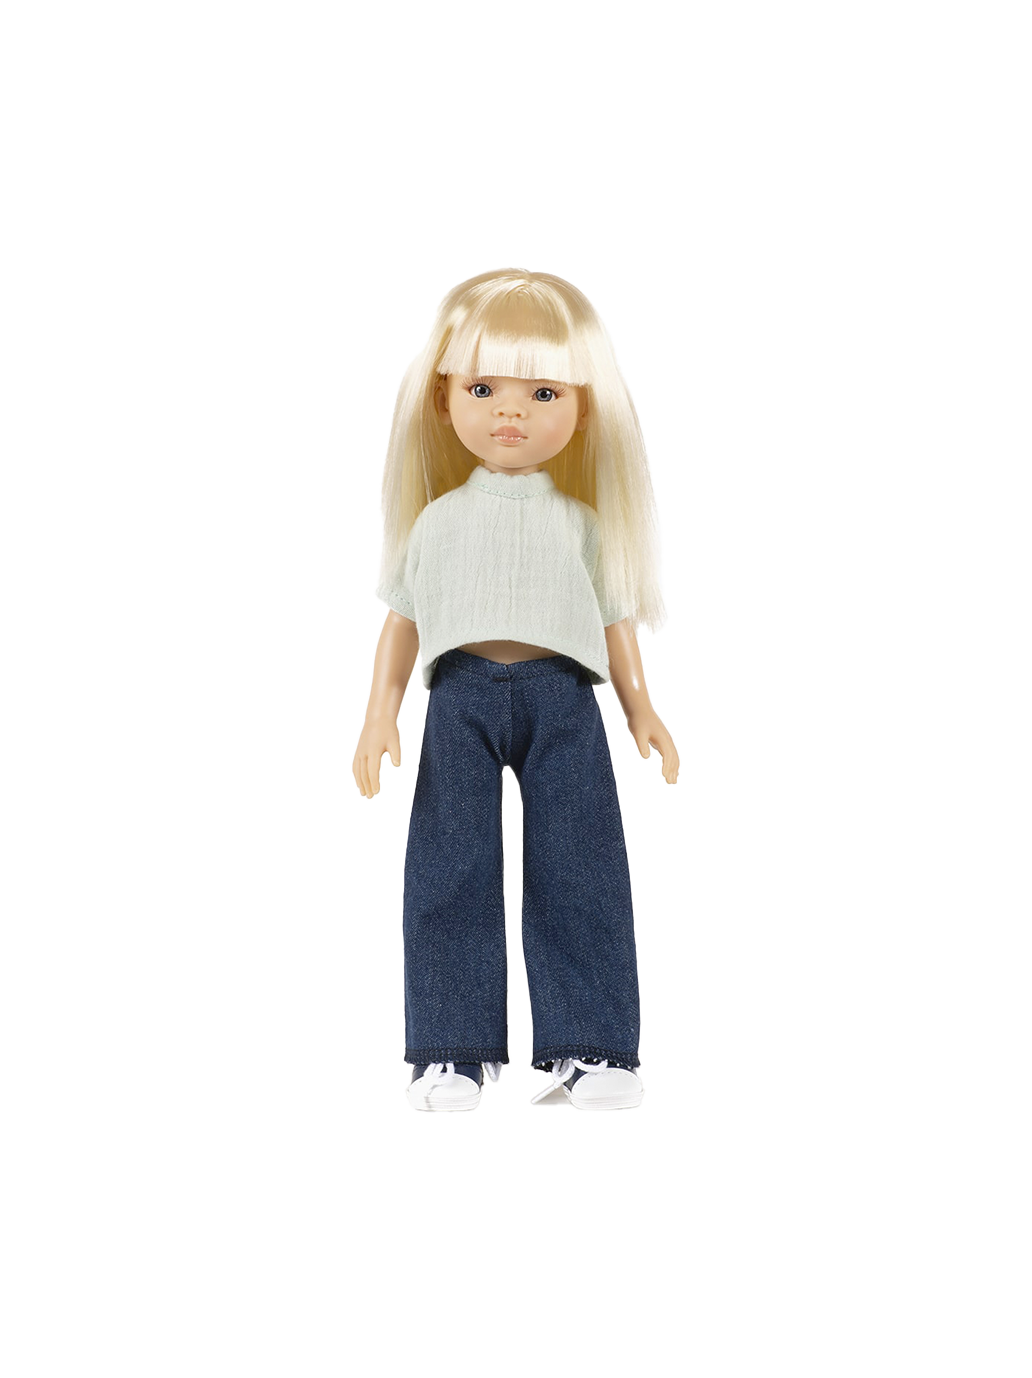 Amigas doll in jeans and top